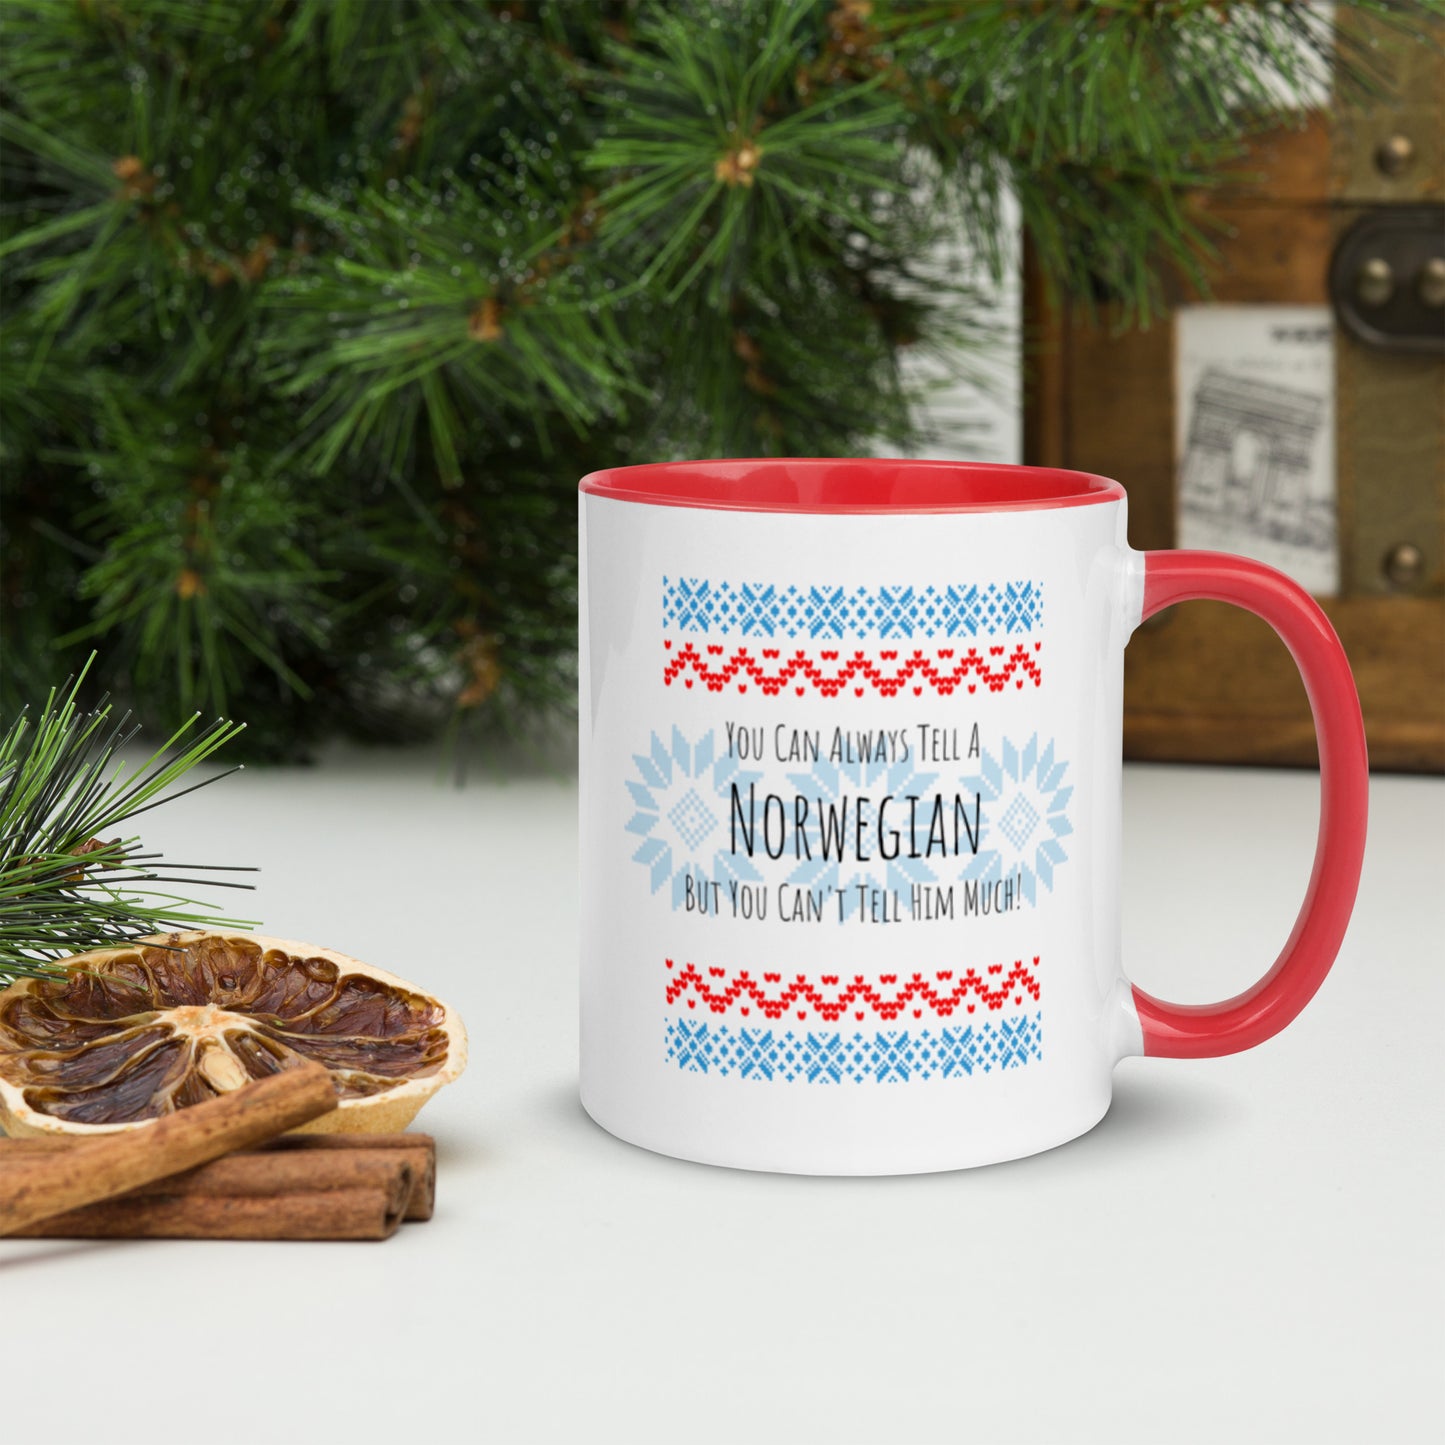 You Can Always Tell A Norwegian But You Can't Tell Him Much! Mug with Color Inside - A. Mandaline Art